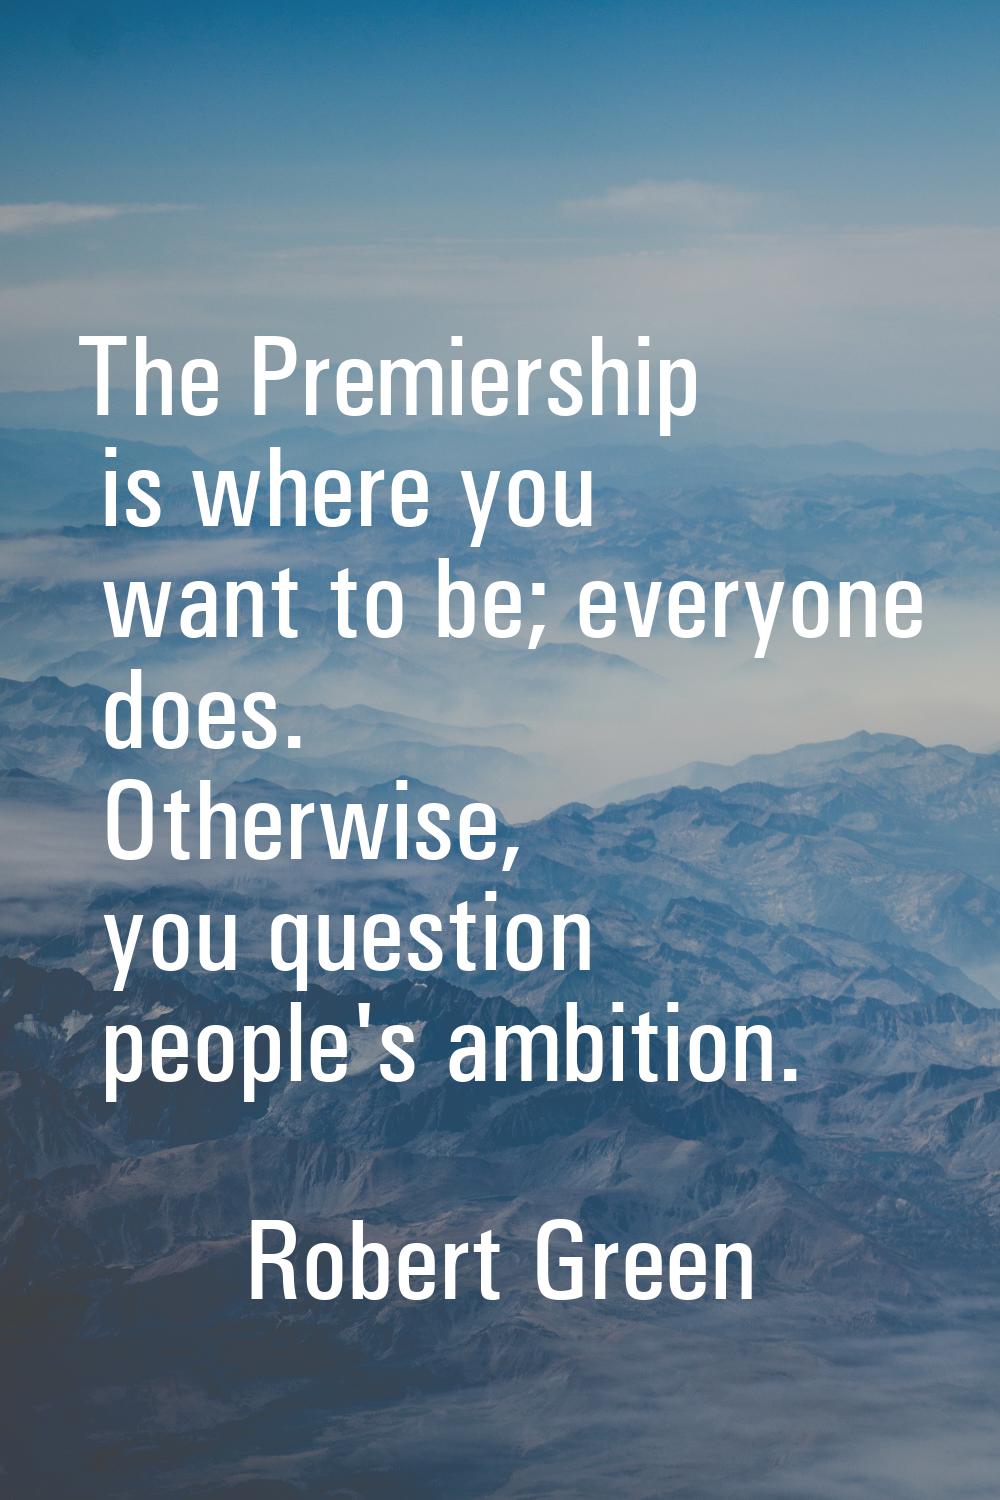 The Premiership is where you want to be; everyone does. Otherwise, you question people's ambition.